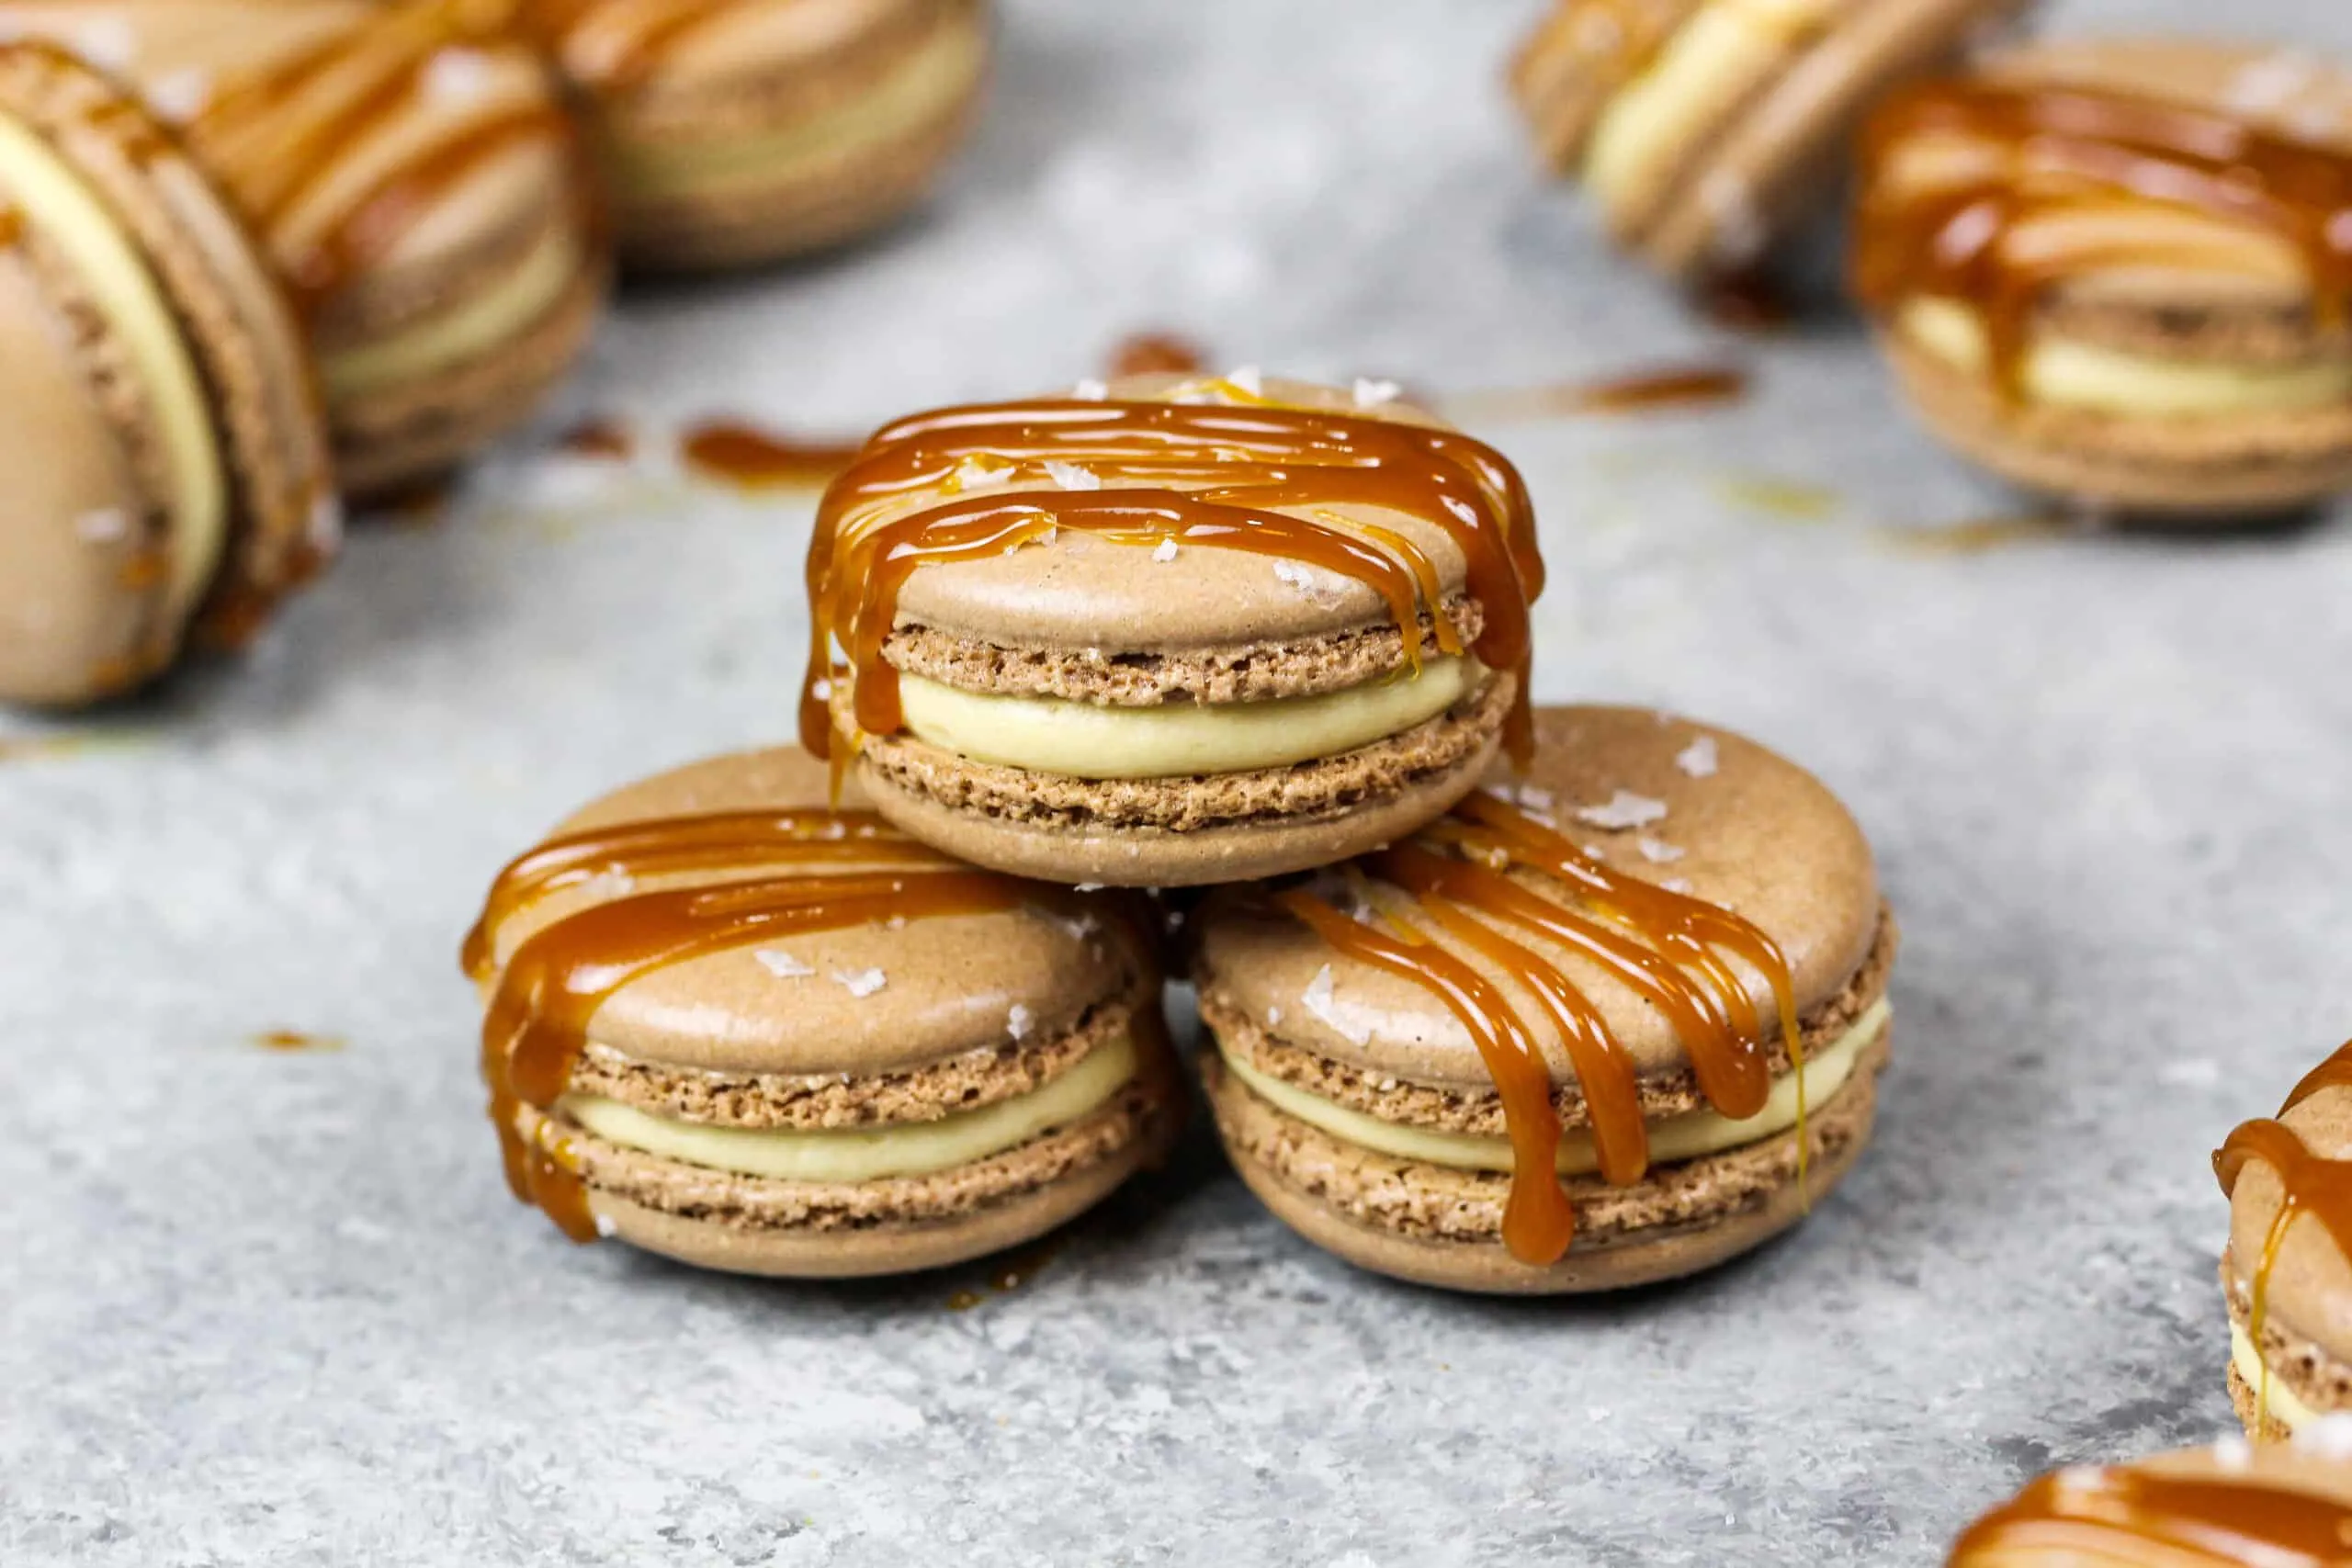 image of salted caramel macarons drizzled with caramel sauce and flakey sea salt